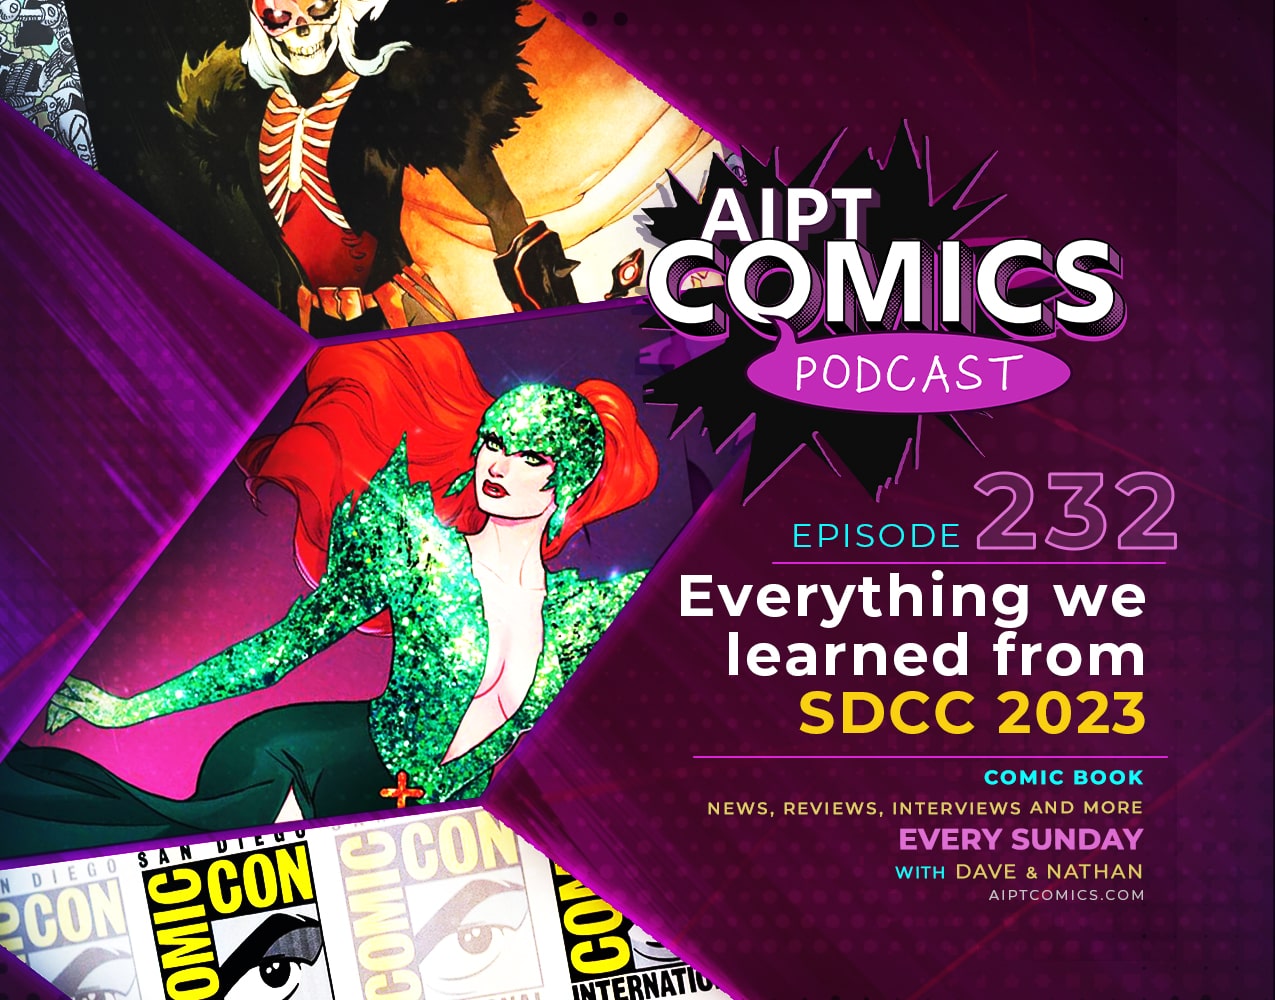 AIPT Comics Podcast episode 232: Everything we learned from SDCC 2023